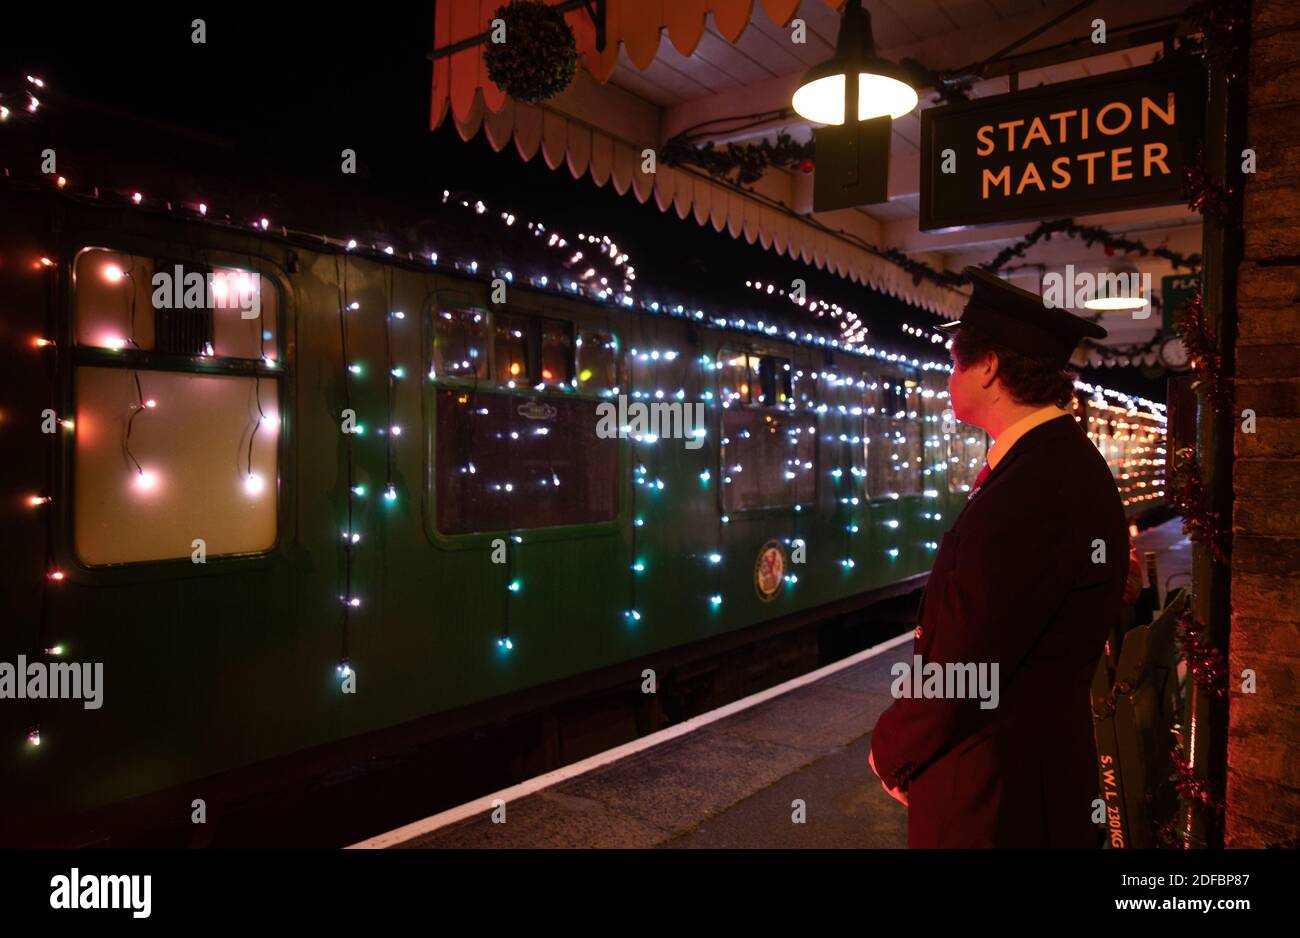 A guard looks at the world's first digital LED train, created using thousands of fully controllable colour mixing LED lights, at Alton station during a preview of Steam Illuminations at Watercress Line, which opens to the public on Friday December 4. Stock Photo